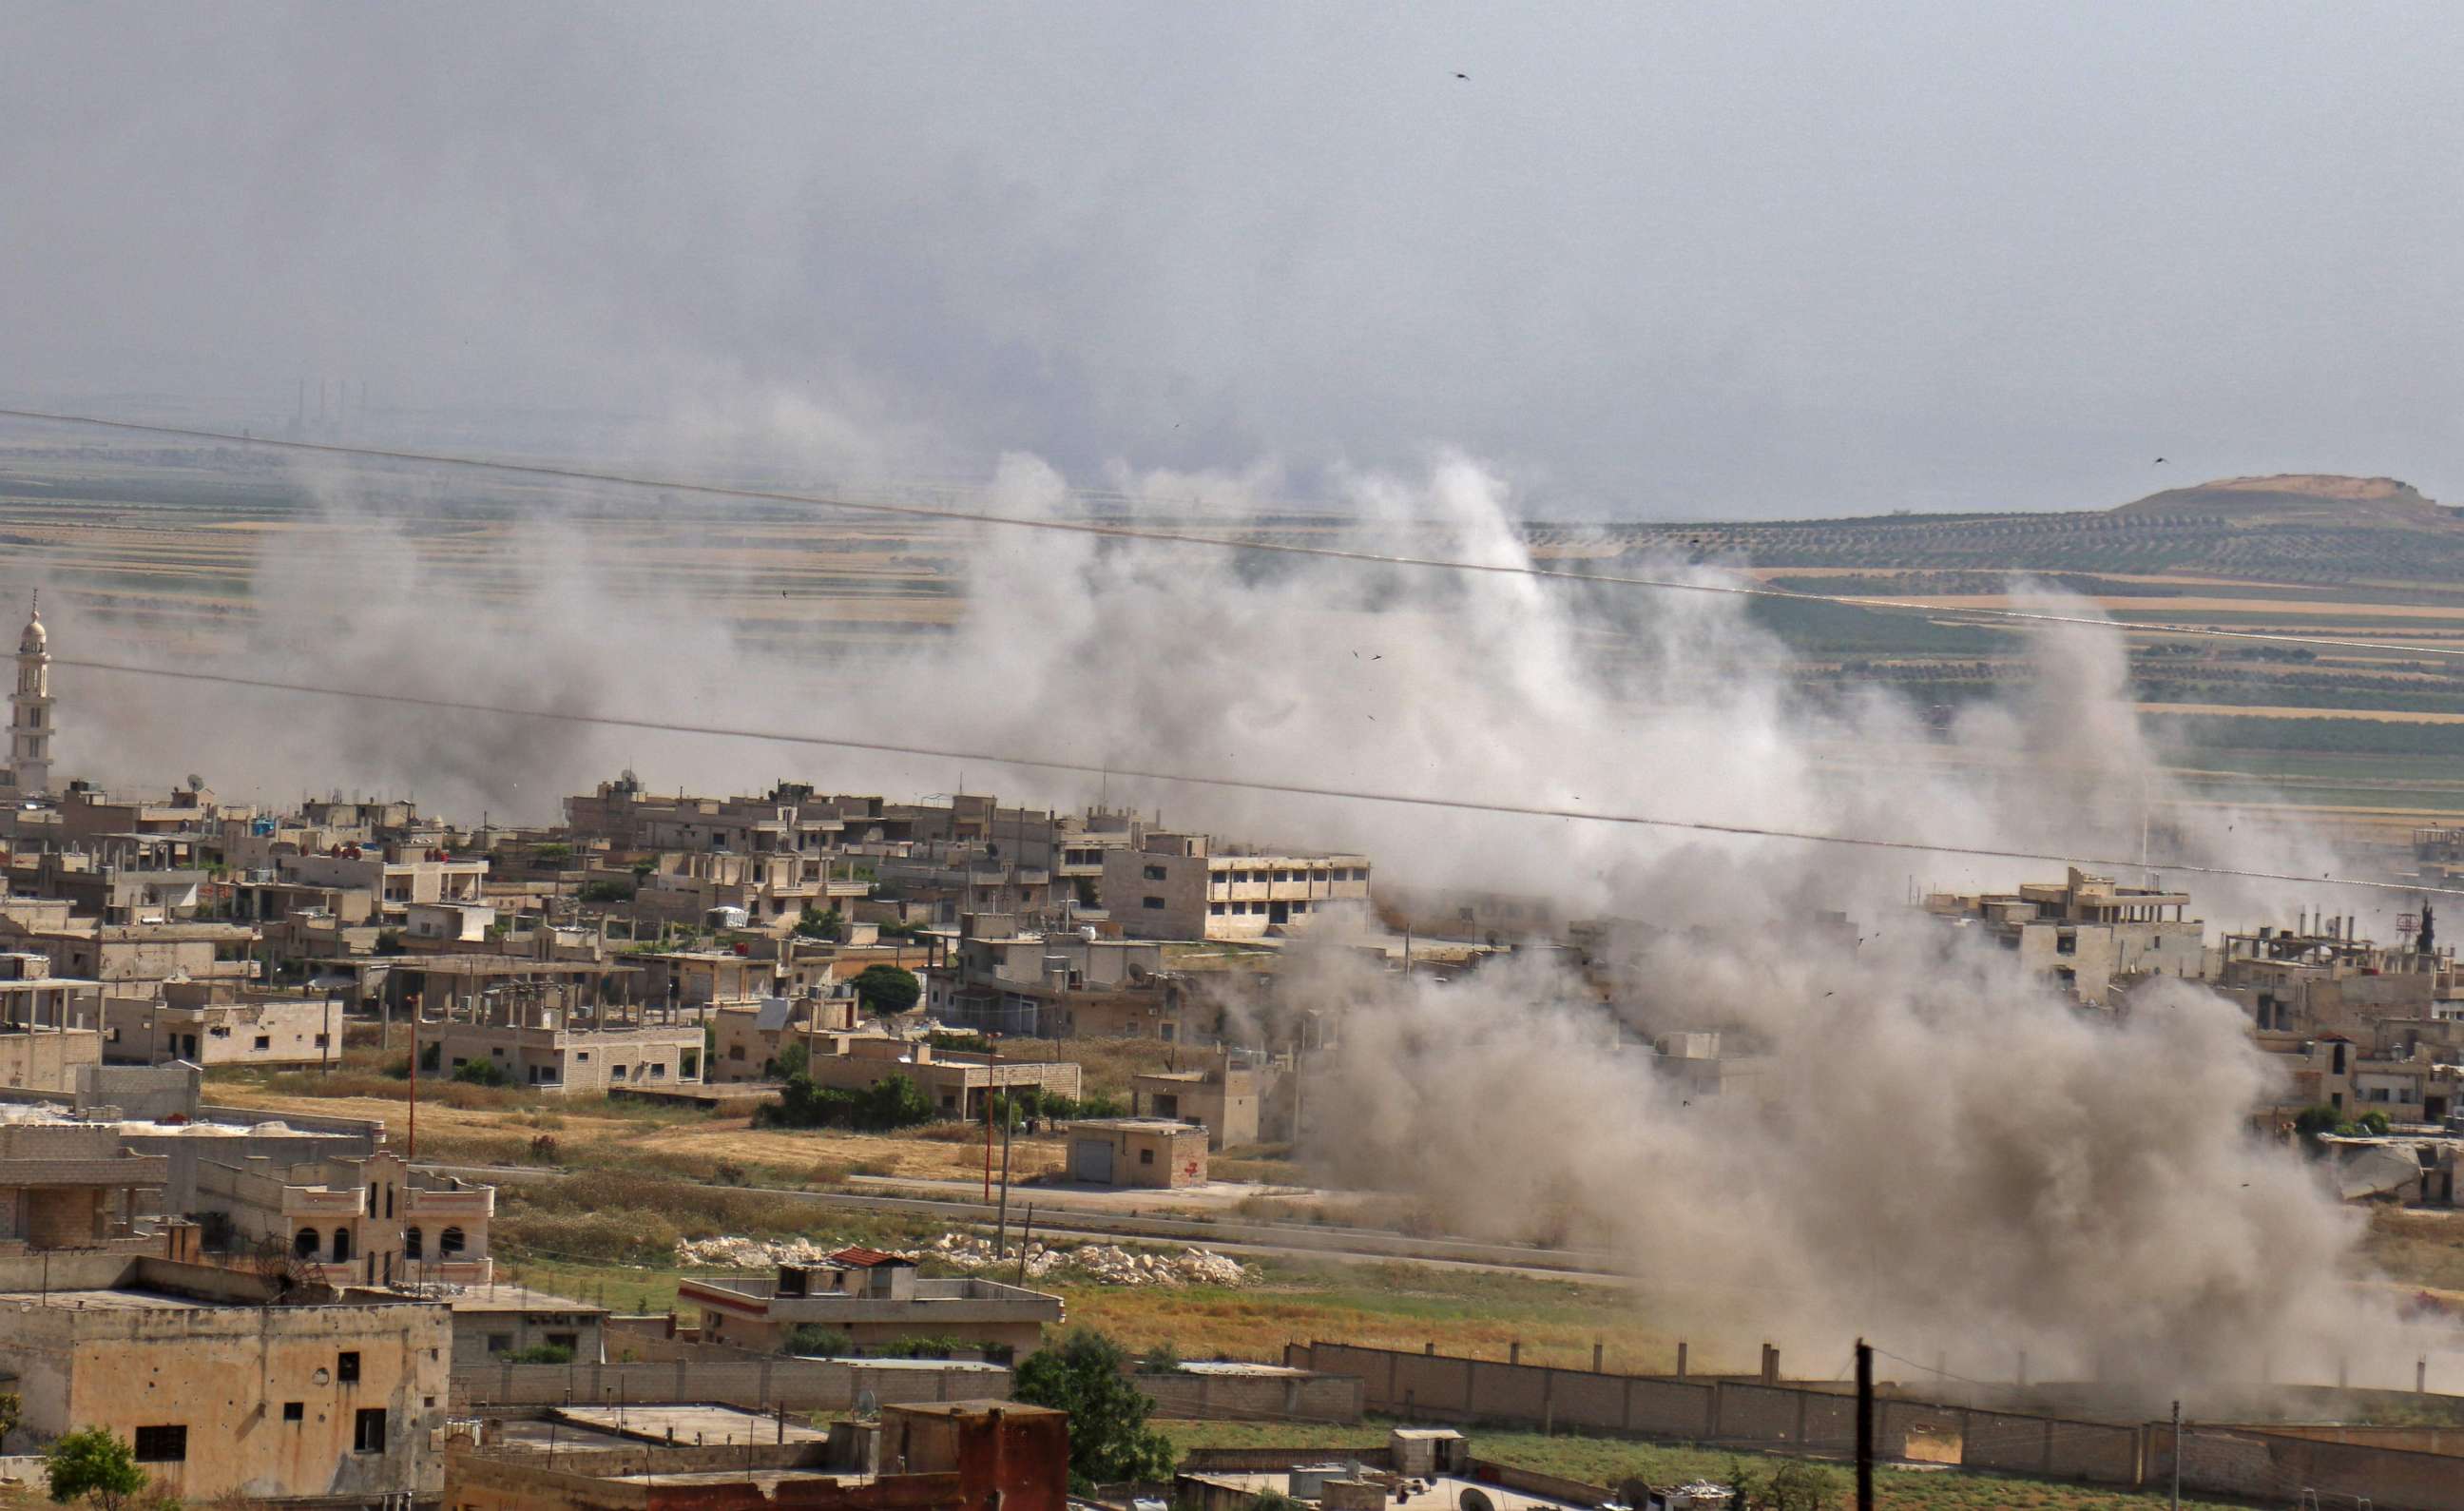 PHOTO: Smoke plumes are seen following a reported Syrian government forces' bombardment on the town of Khan Sheikhun in the southern countryside of the rebel-held Idlib province, May 22, 2019. 